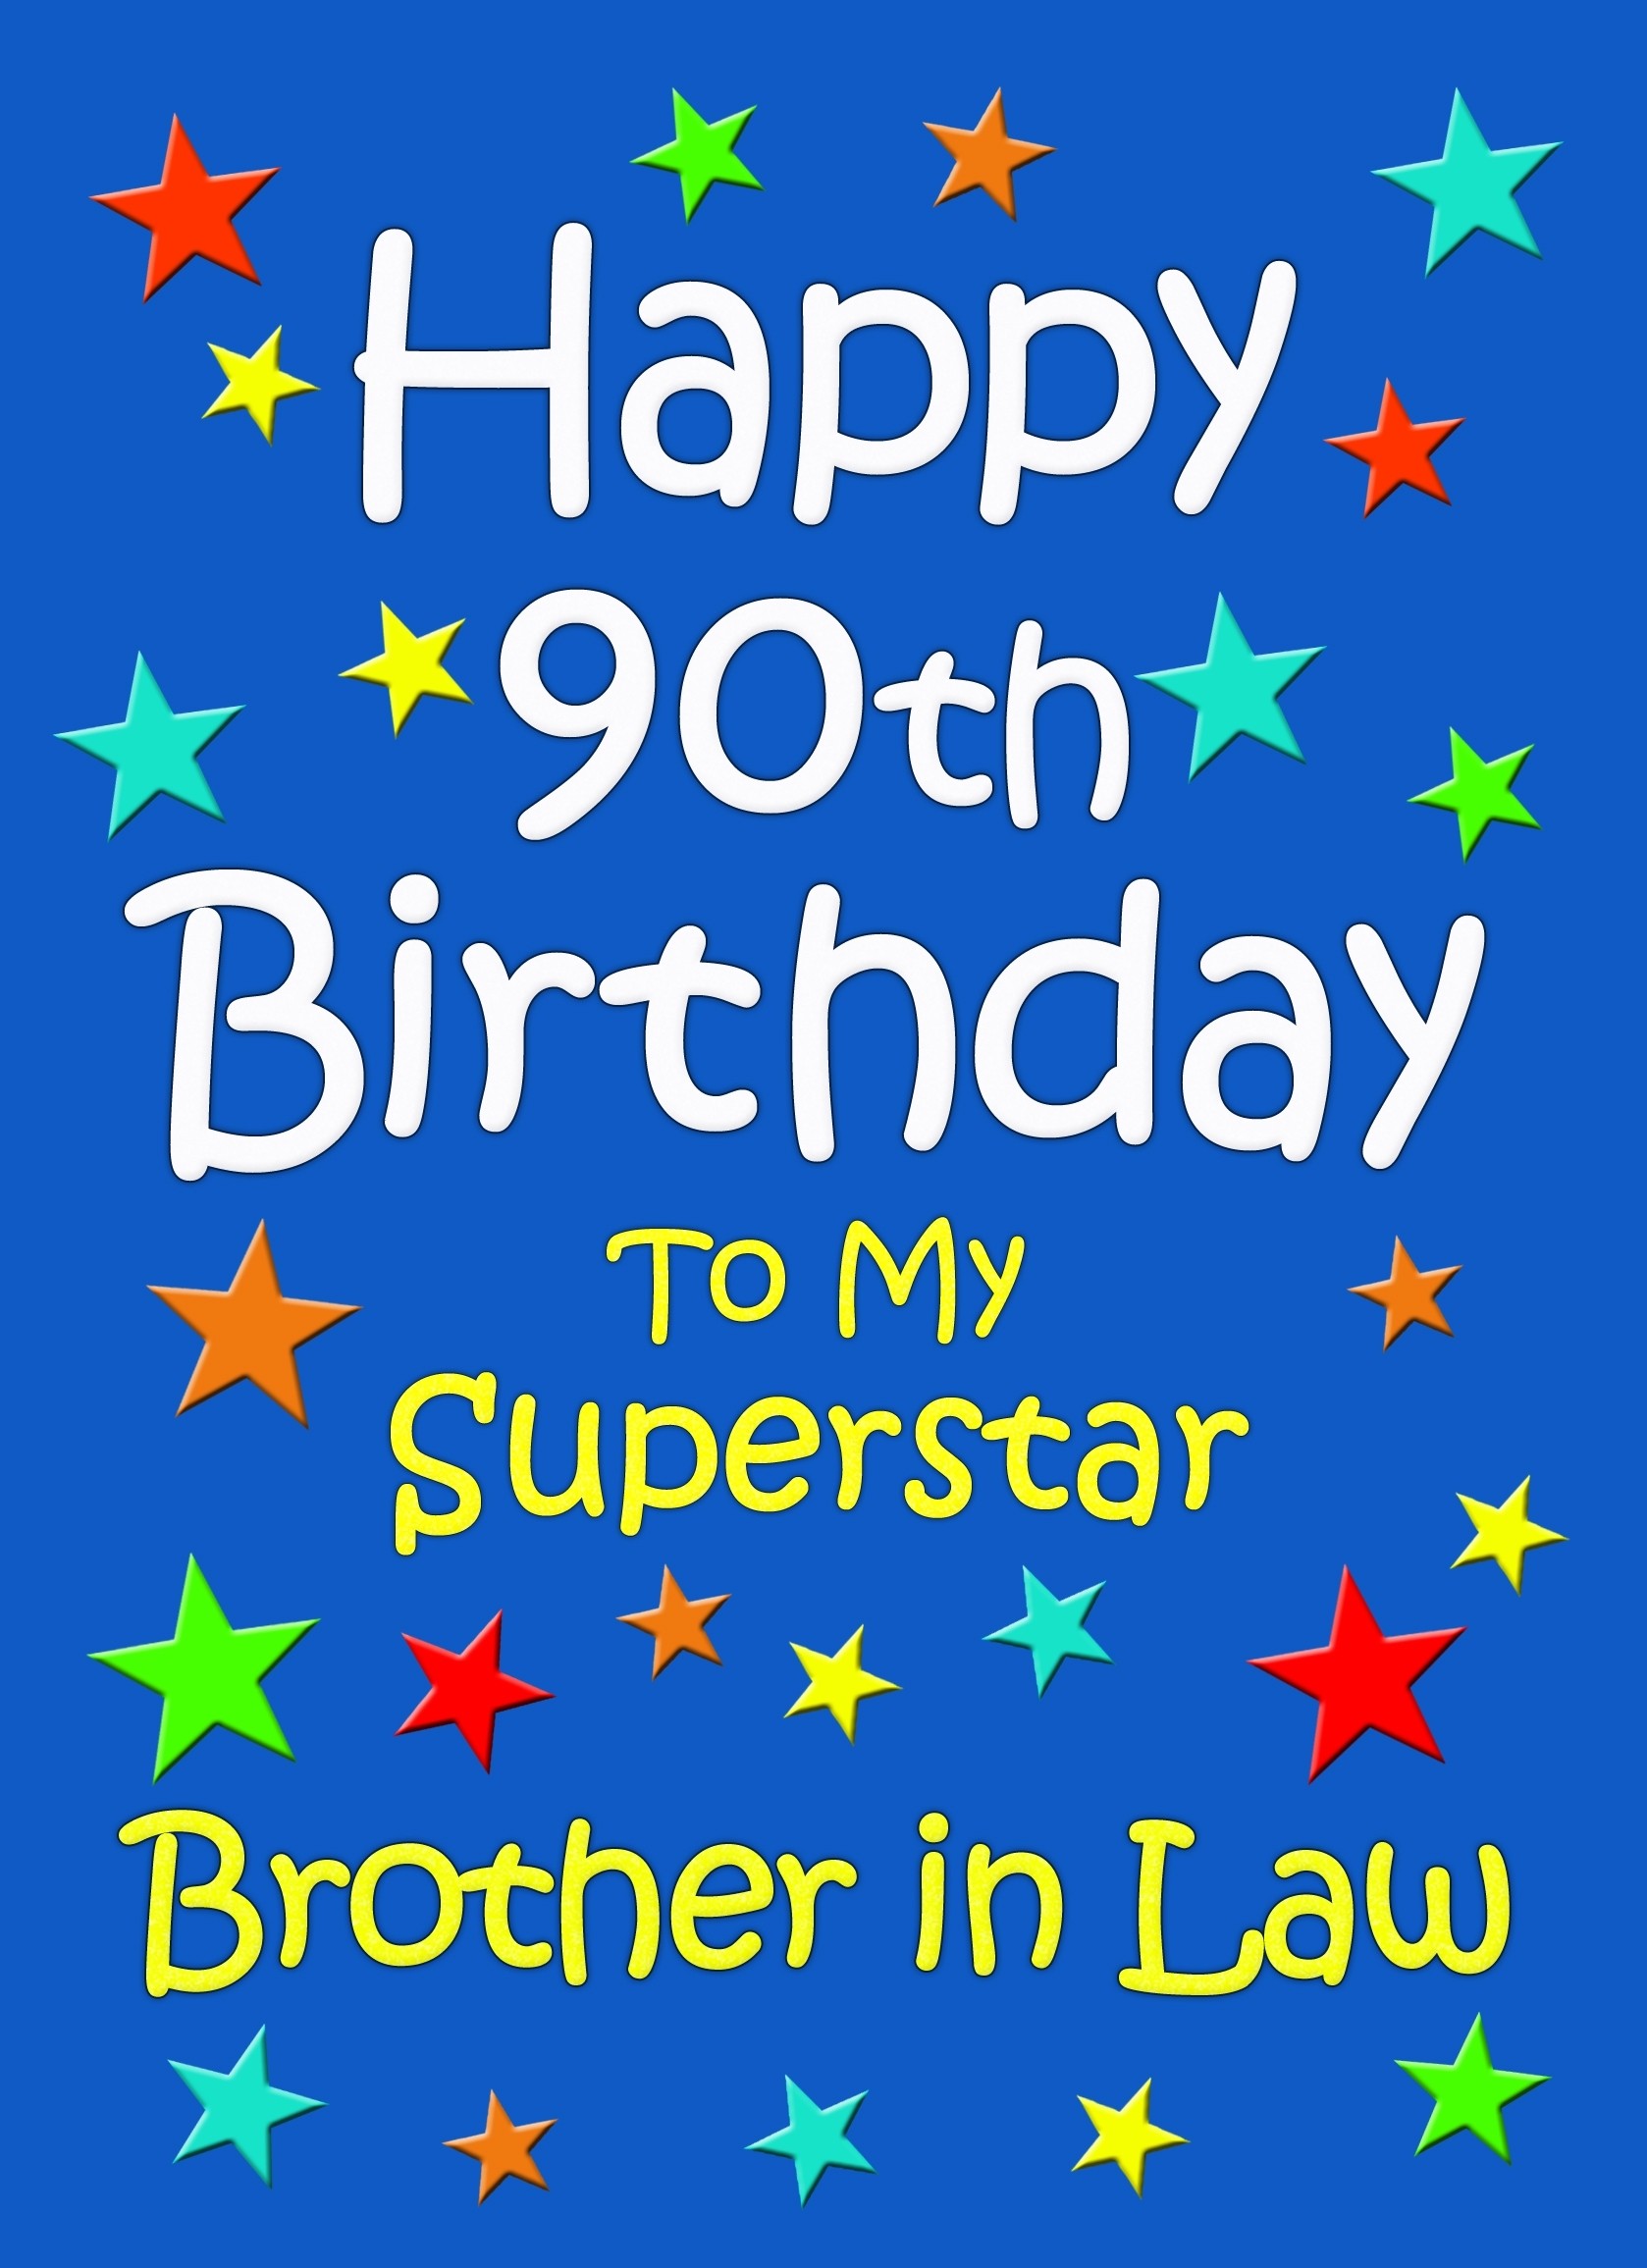 Brother in Law 90th Birthday Card (Blue)